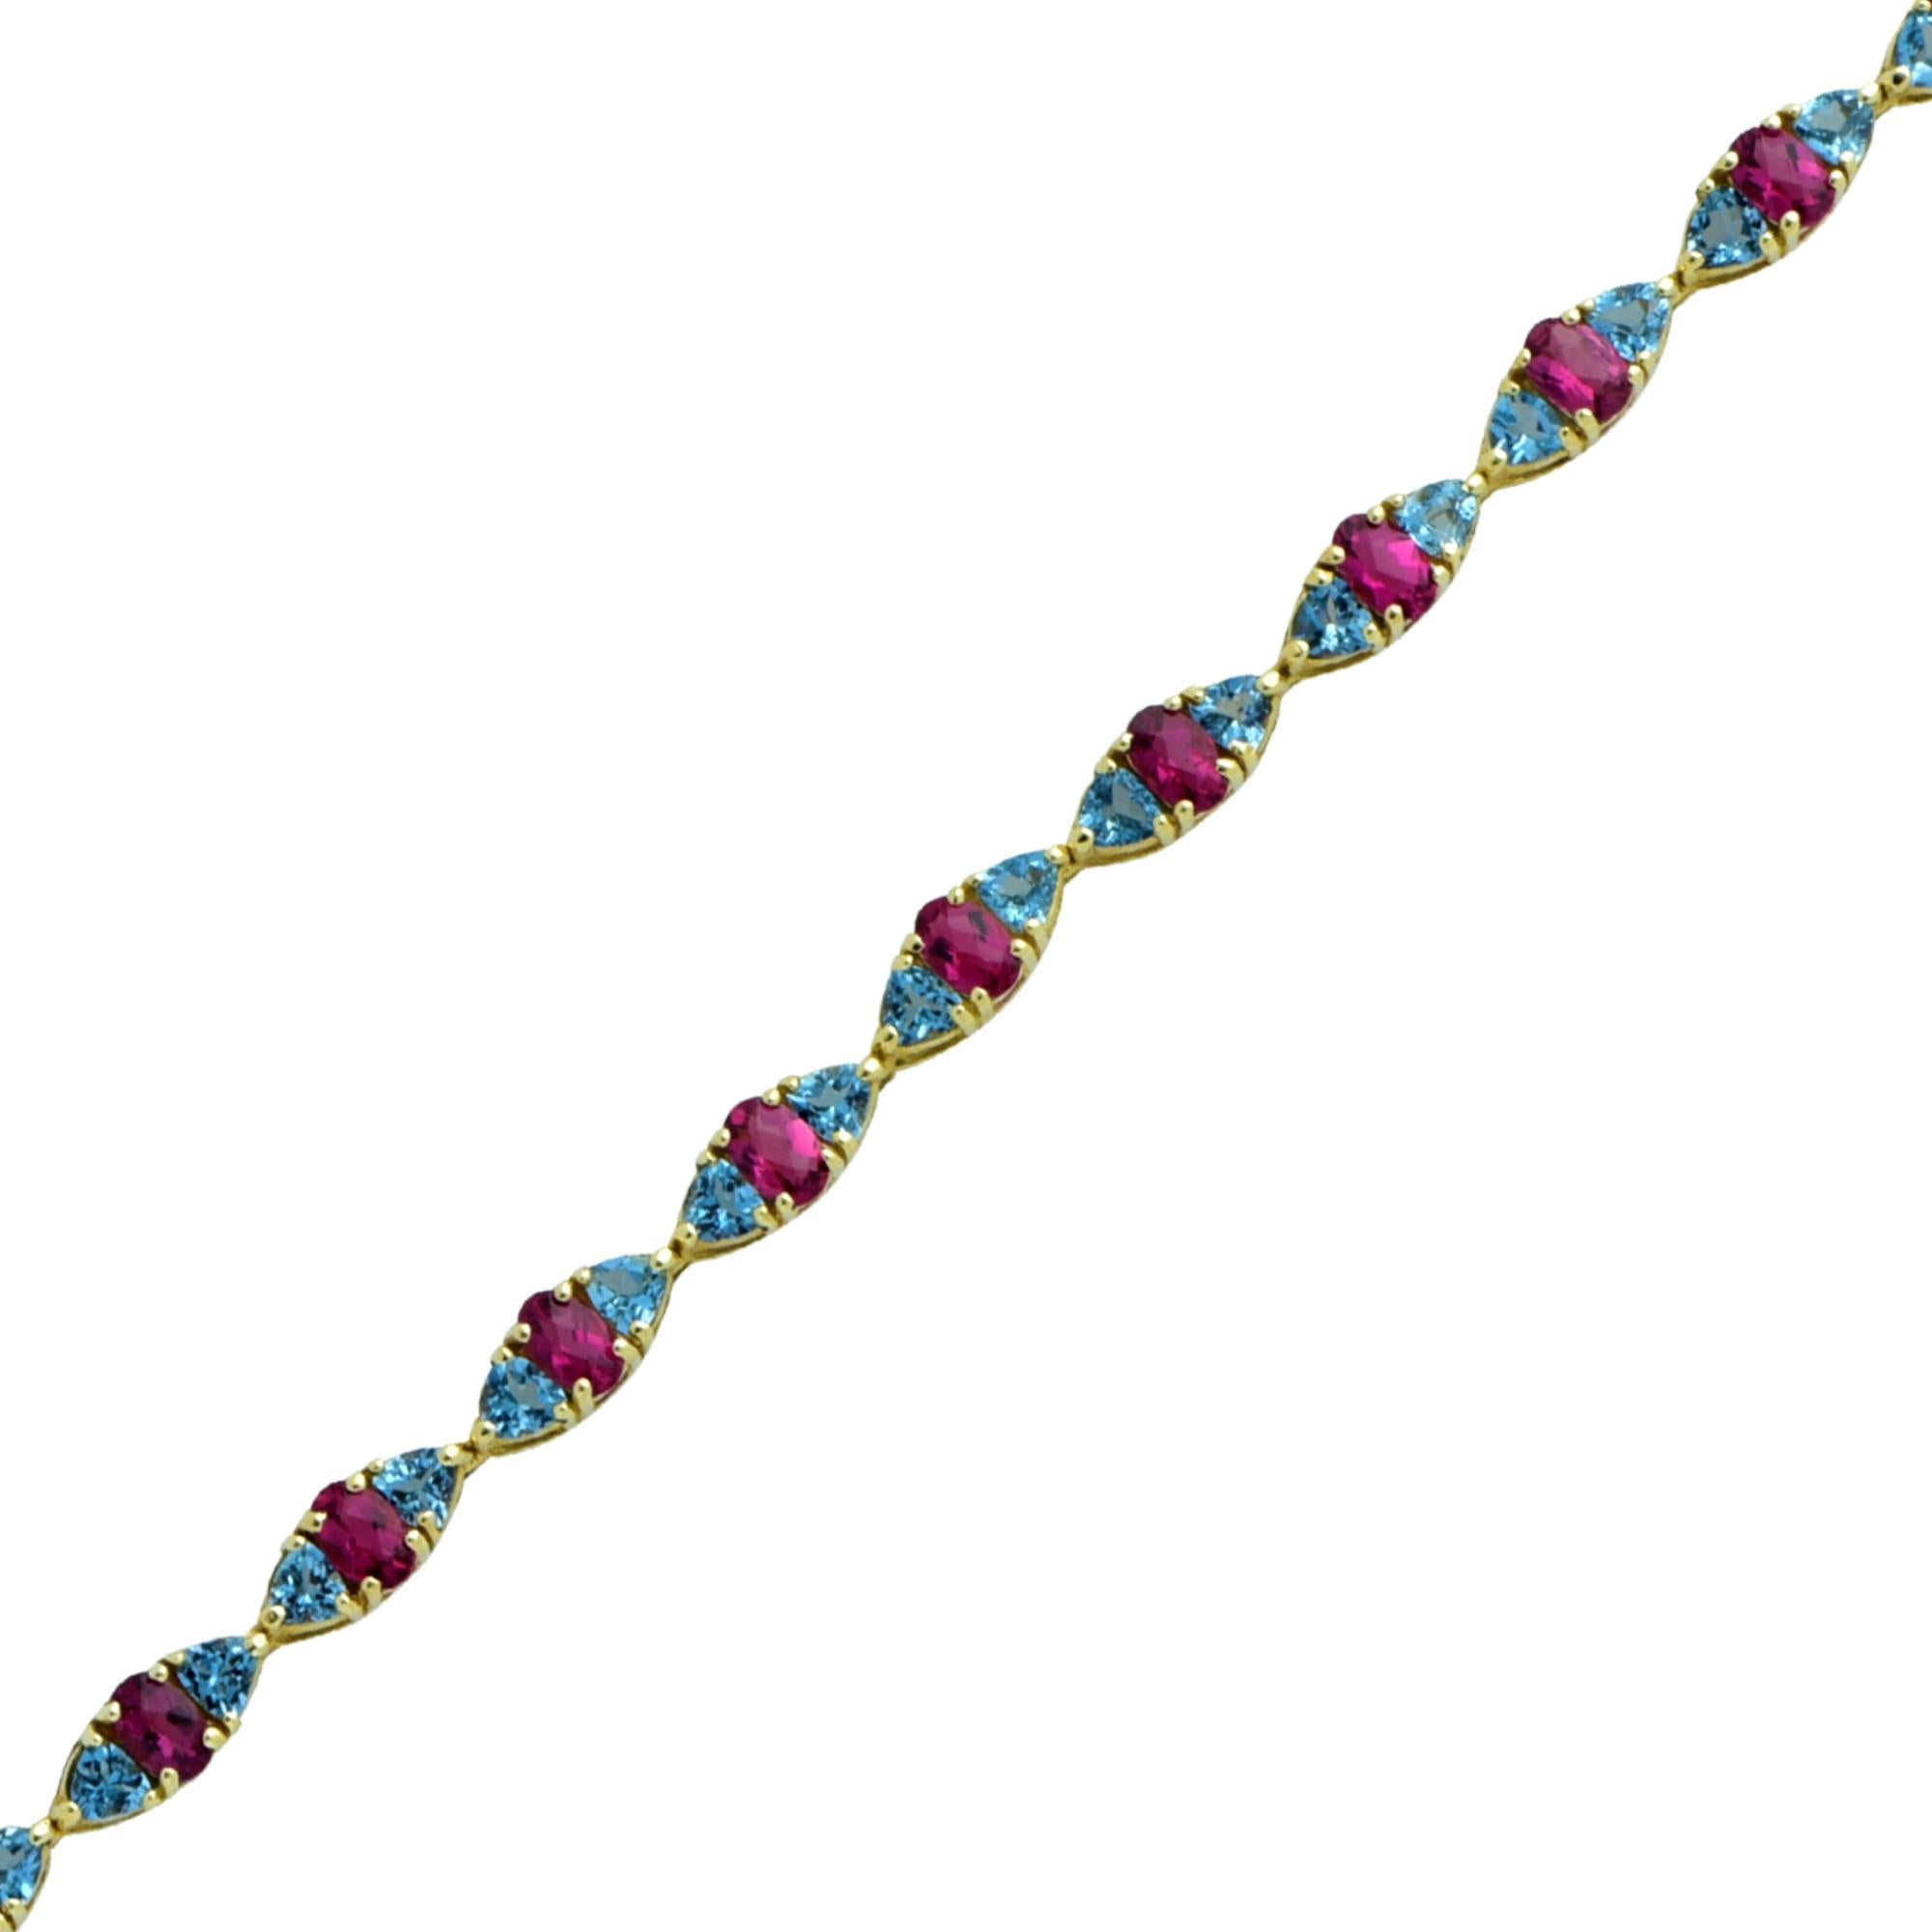 14k yellow gold bracelet featuring 36 oval and trillion cut Tourmalines weighing approximately 10cts total. The tourmalines are set in an color alternating sequence, creating an eye-catching contrast of color. This dainty bracelet measures 7.5